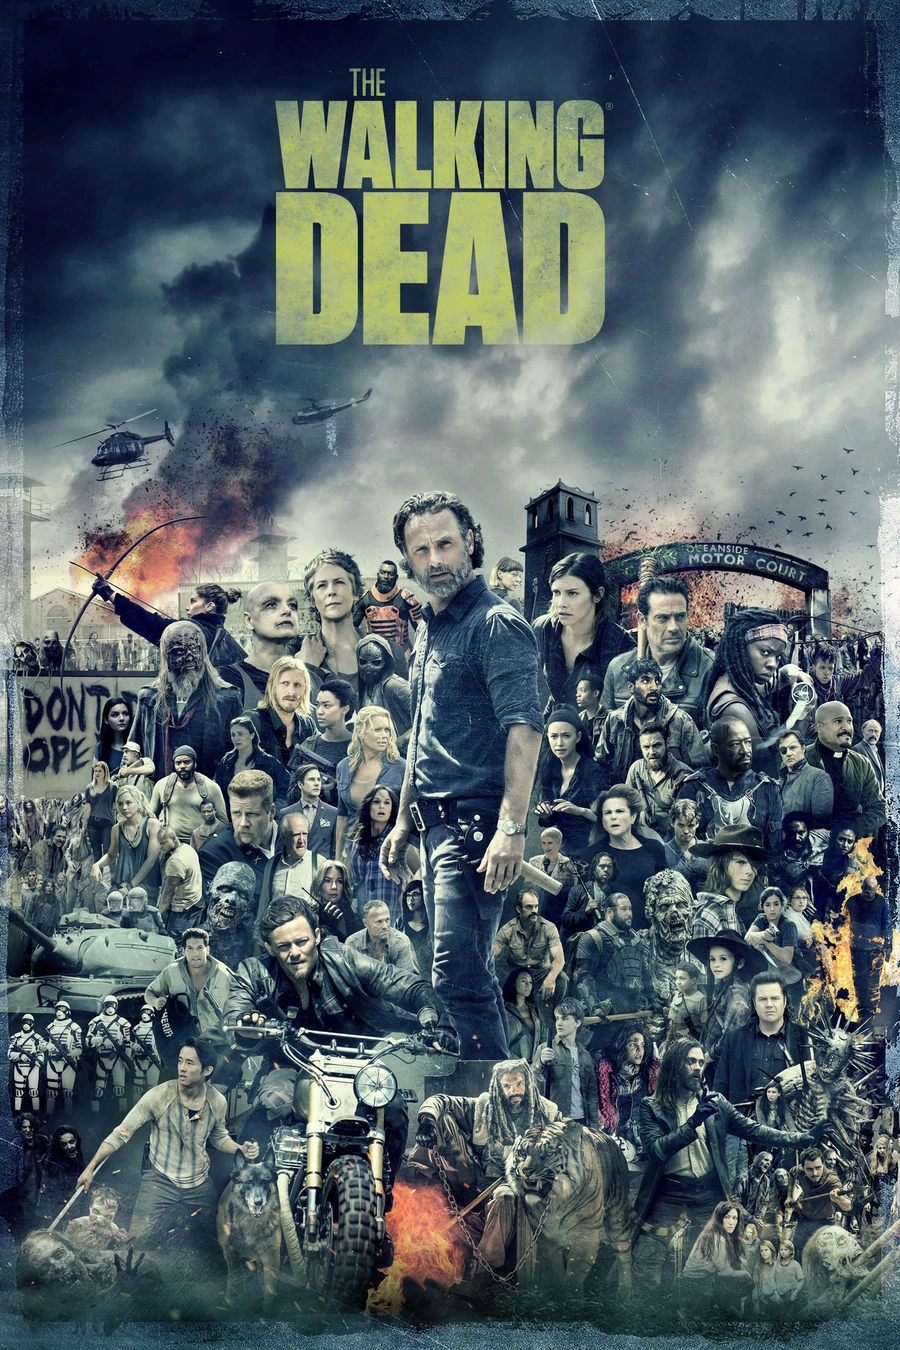 In honor of the completion of the post-apocalyptic drama «The Walking Dead», the last episode of which aired on November 20, AMC has prepared this poster collage with all the characters.